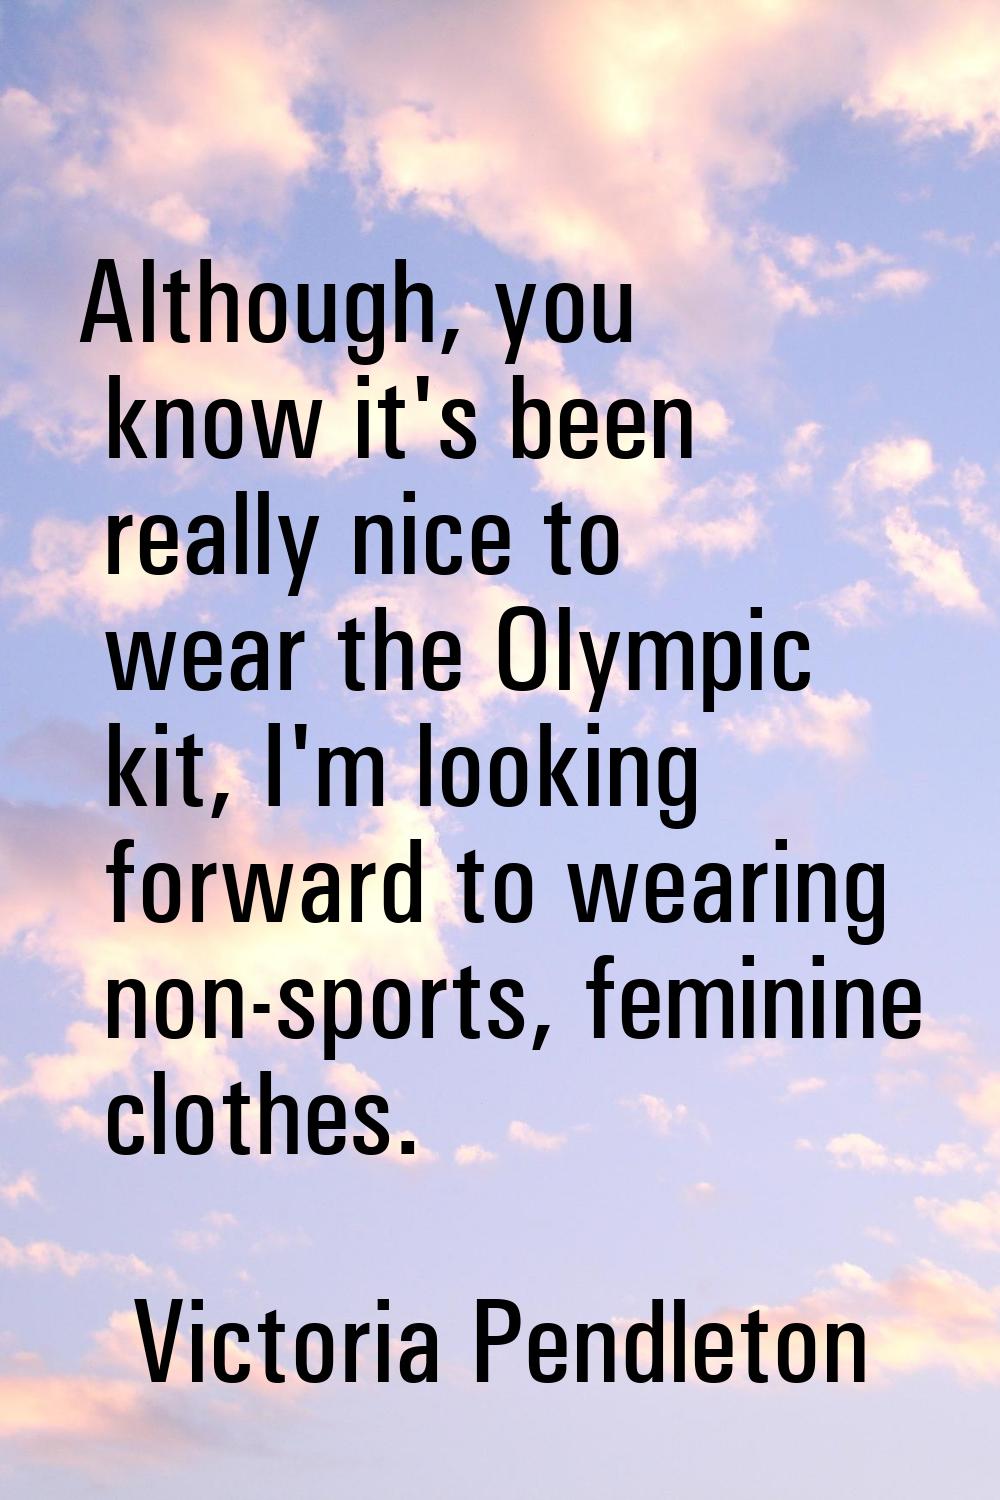 Although, you know it's been really nice to wear the Olympic kit, I'm looking forward to wearing no